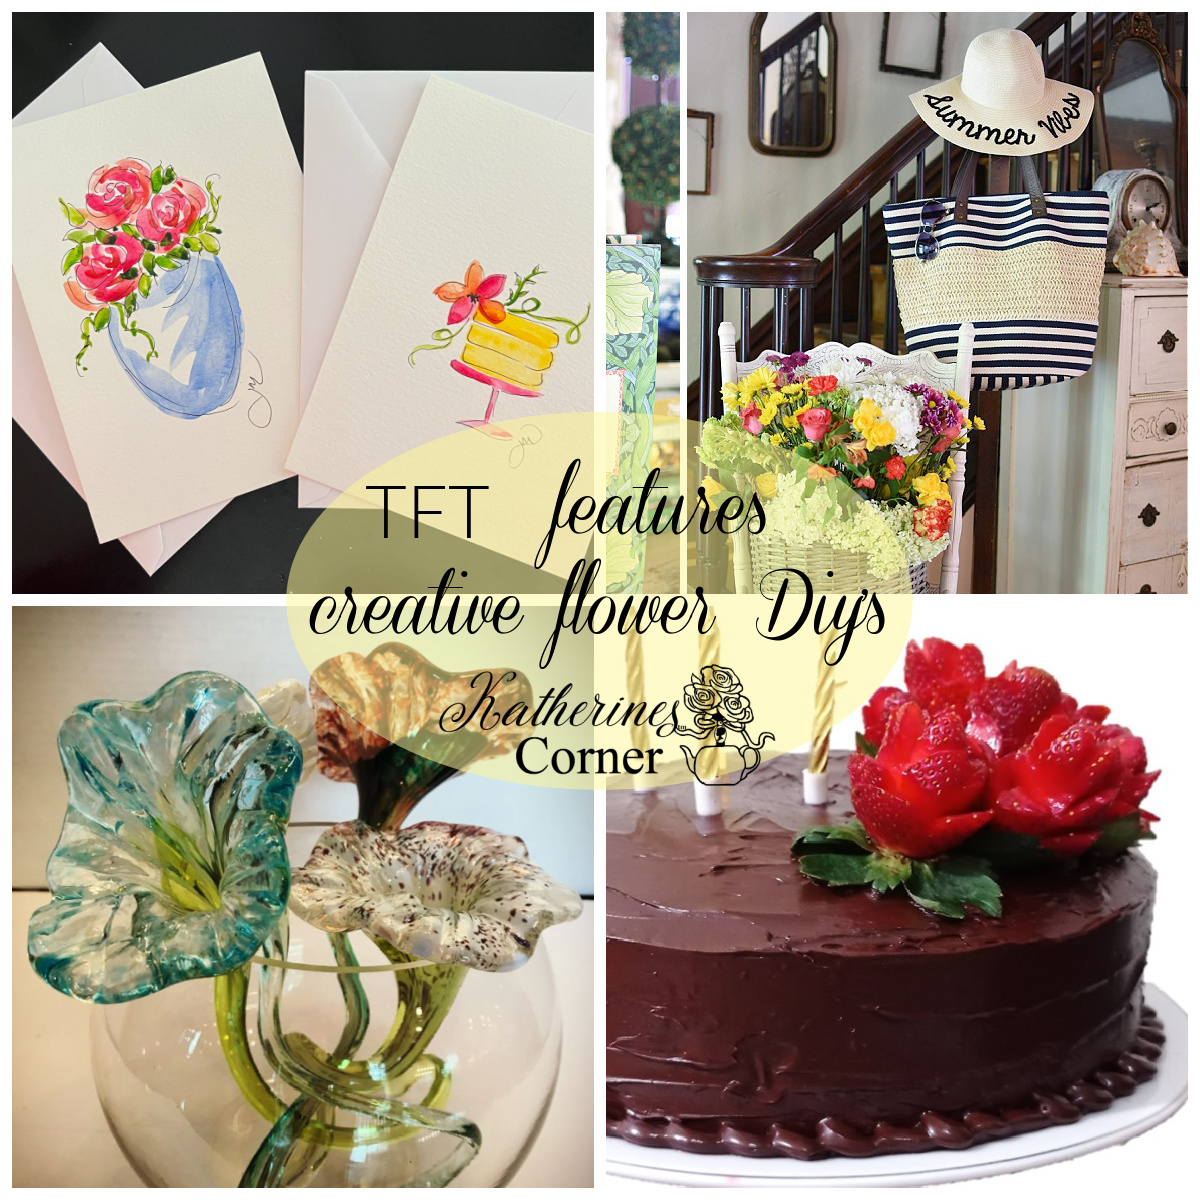 Creative Flower Diy’s and the TFT Blog Hop